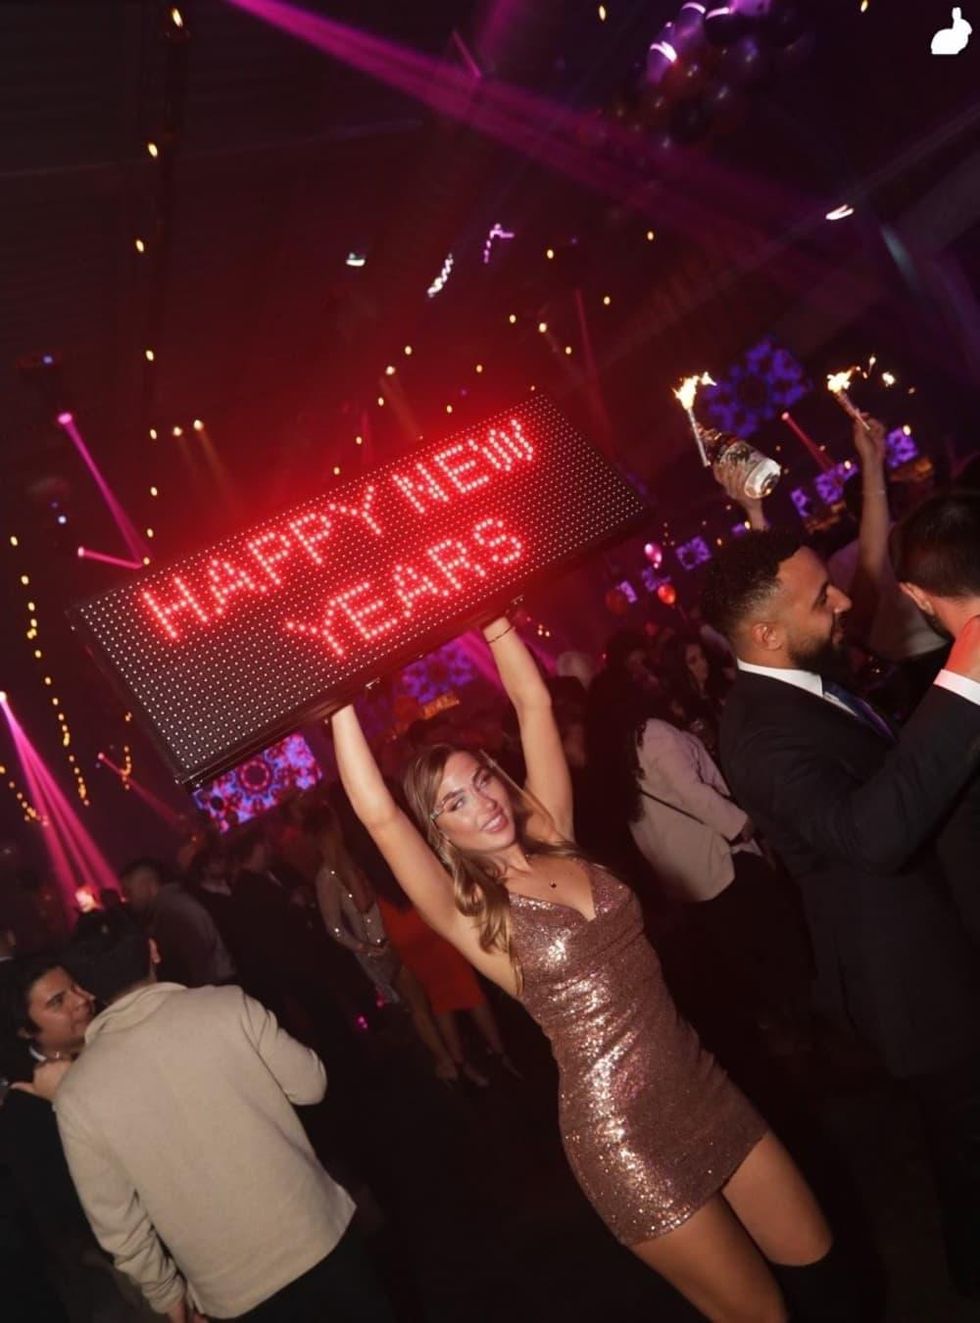 Pour into Houston's hottest venue for a grand New Year's Eve party